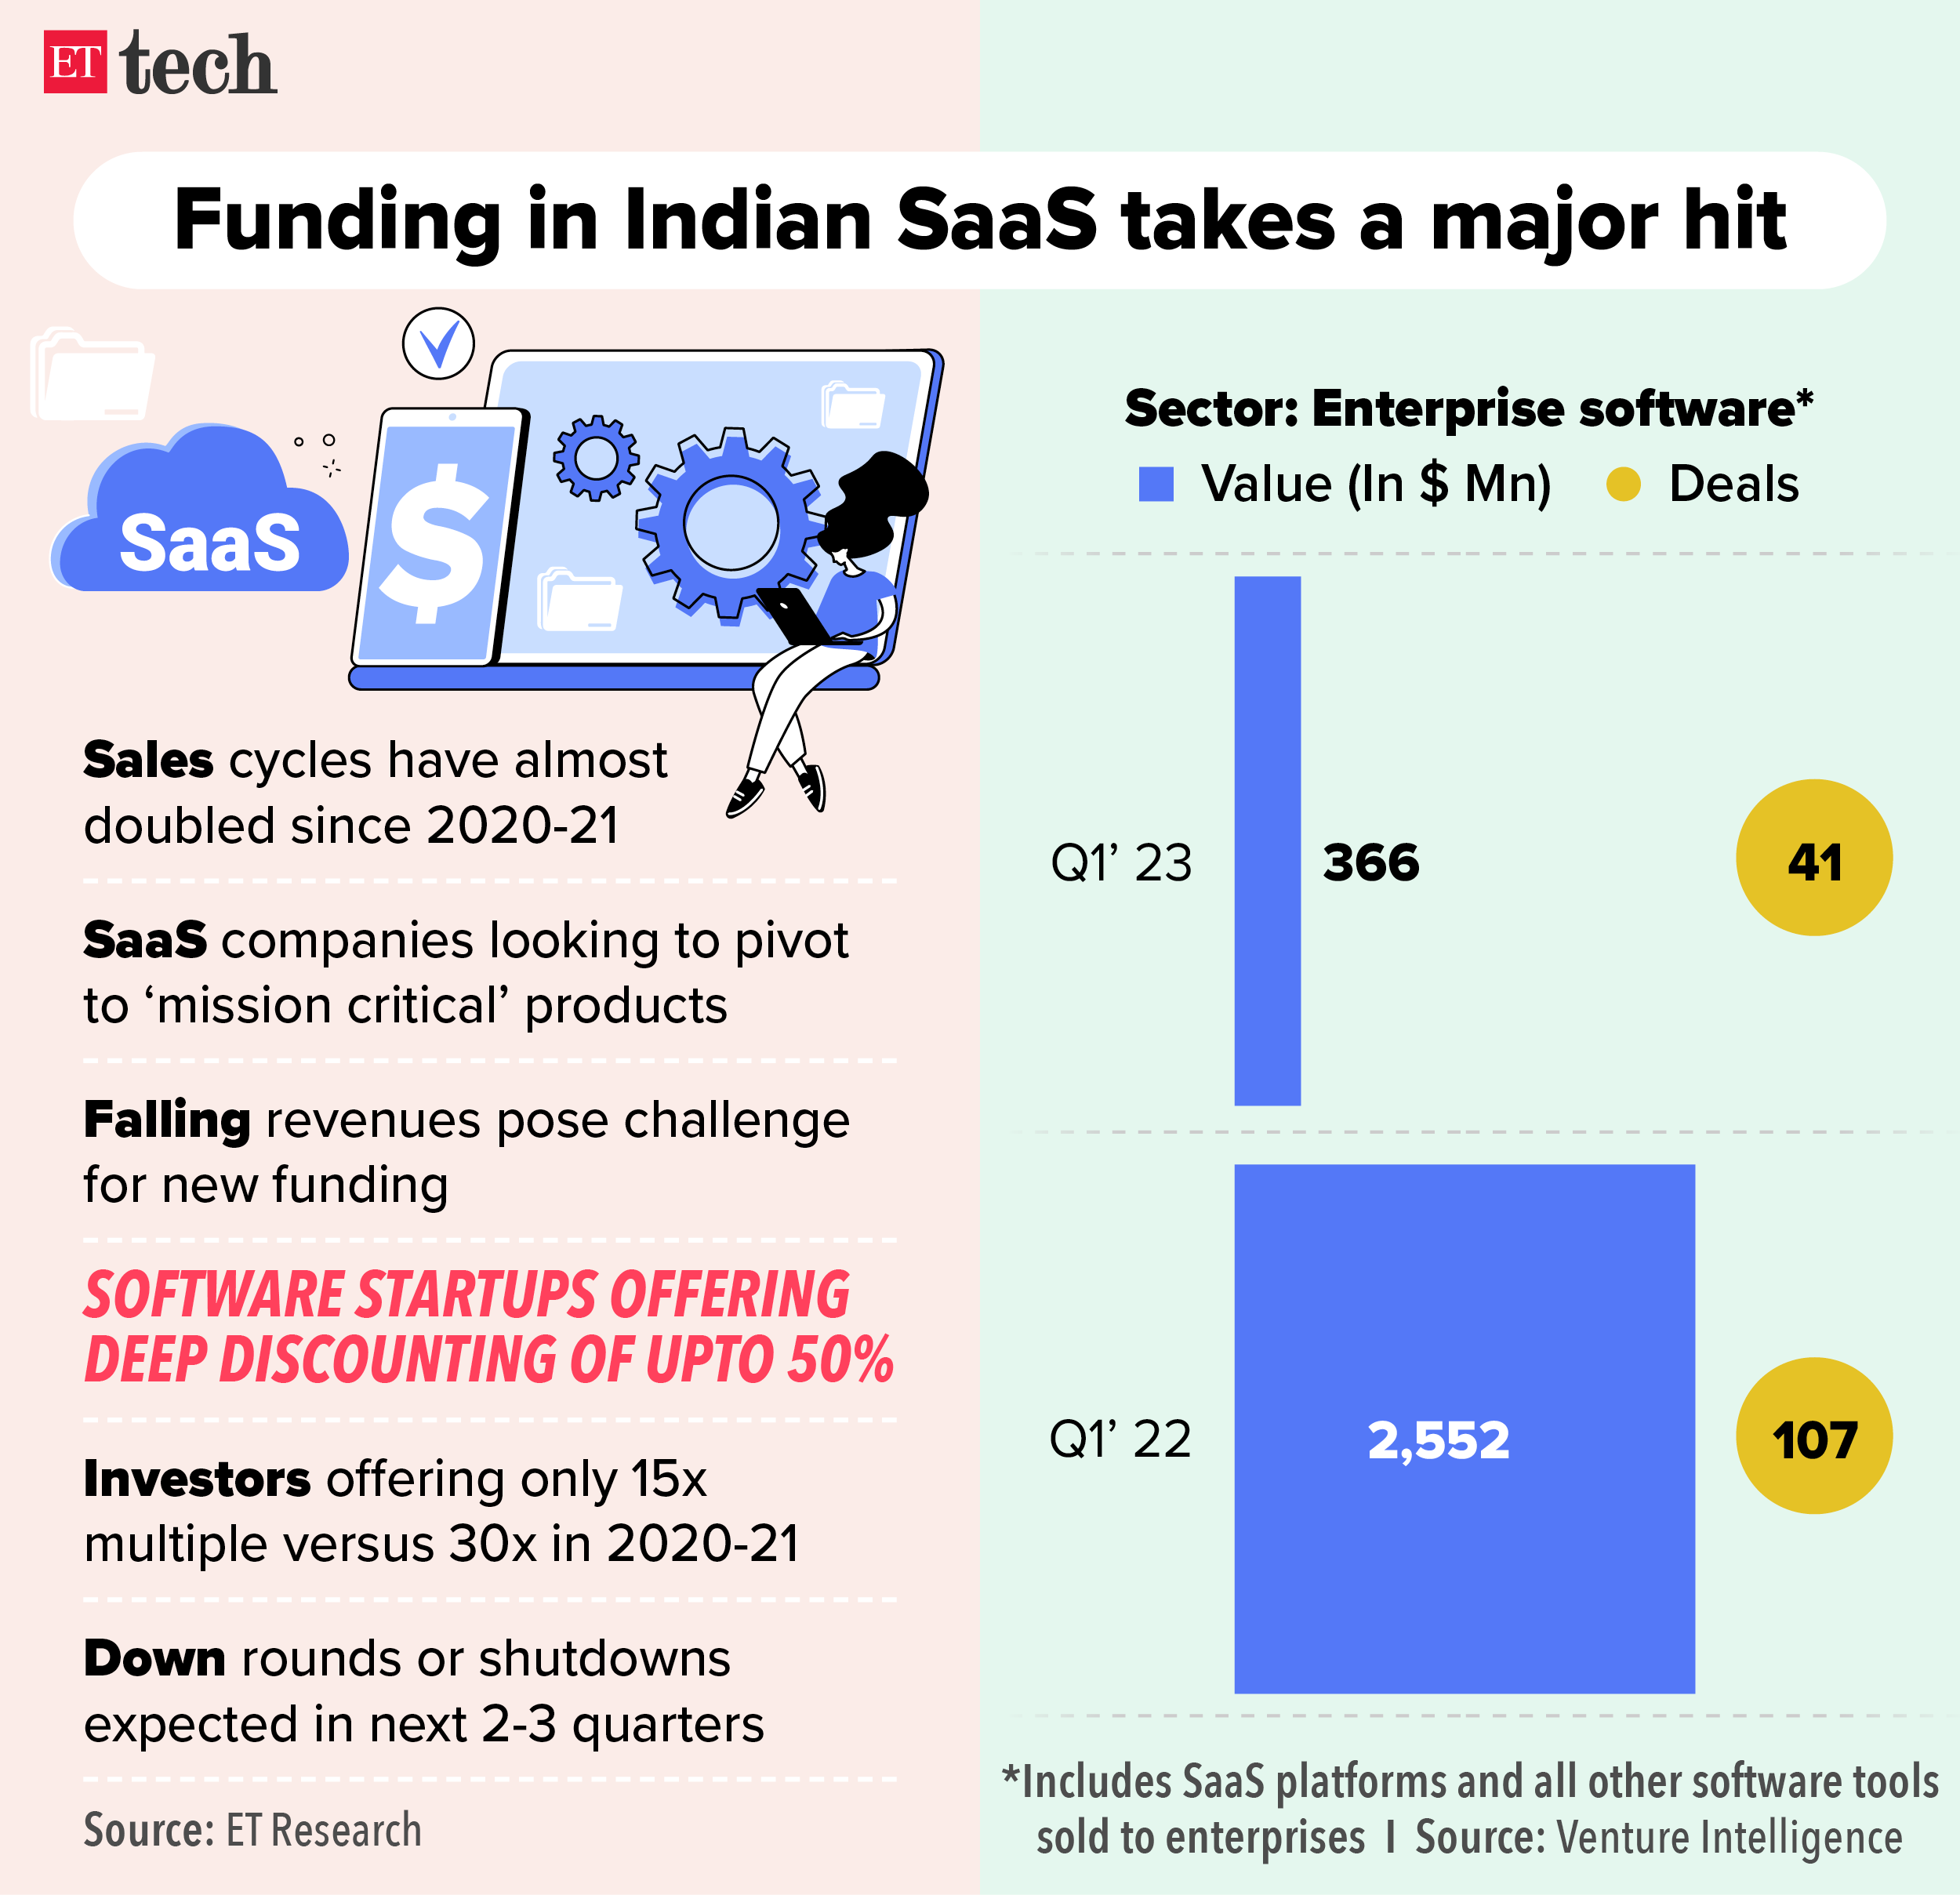 Funding in Indian SaaS takes a major hit